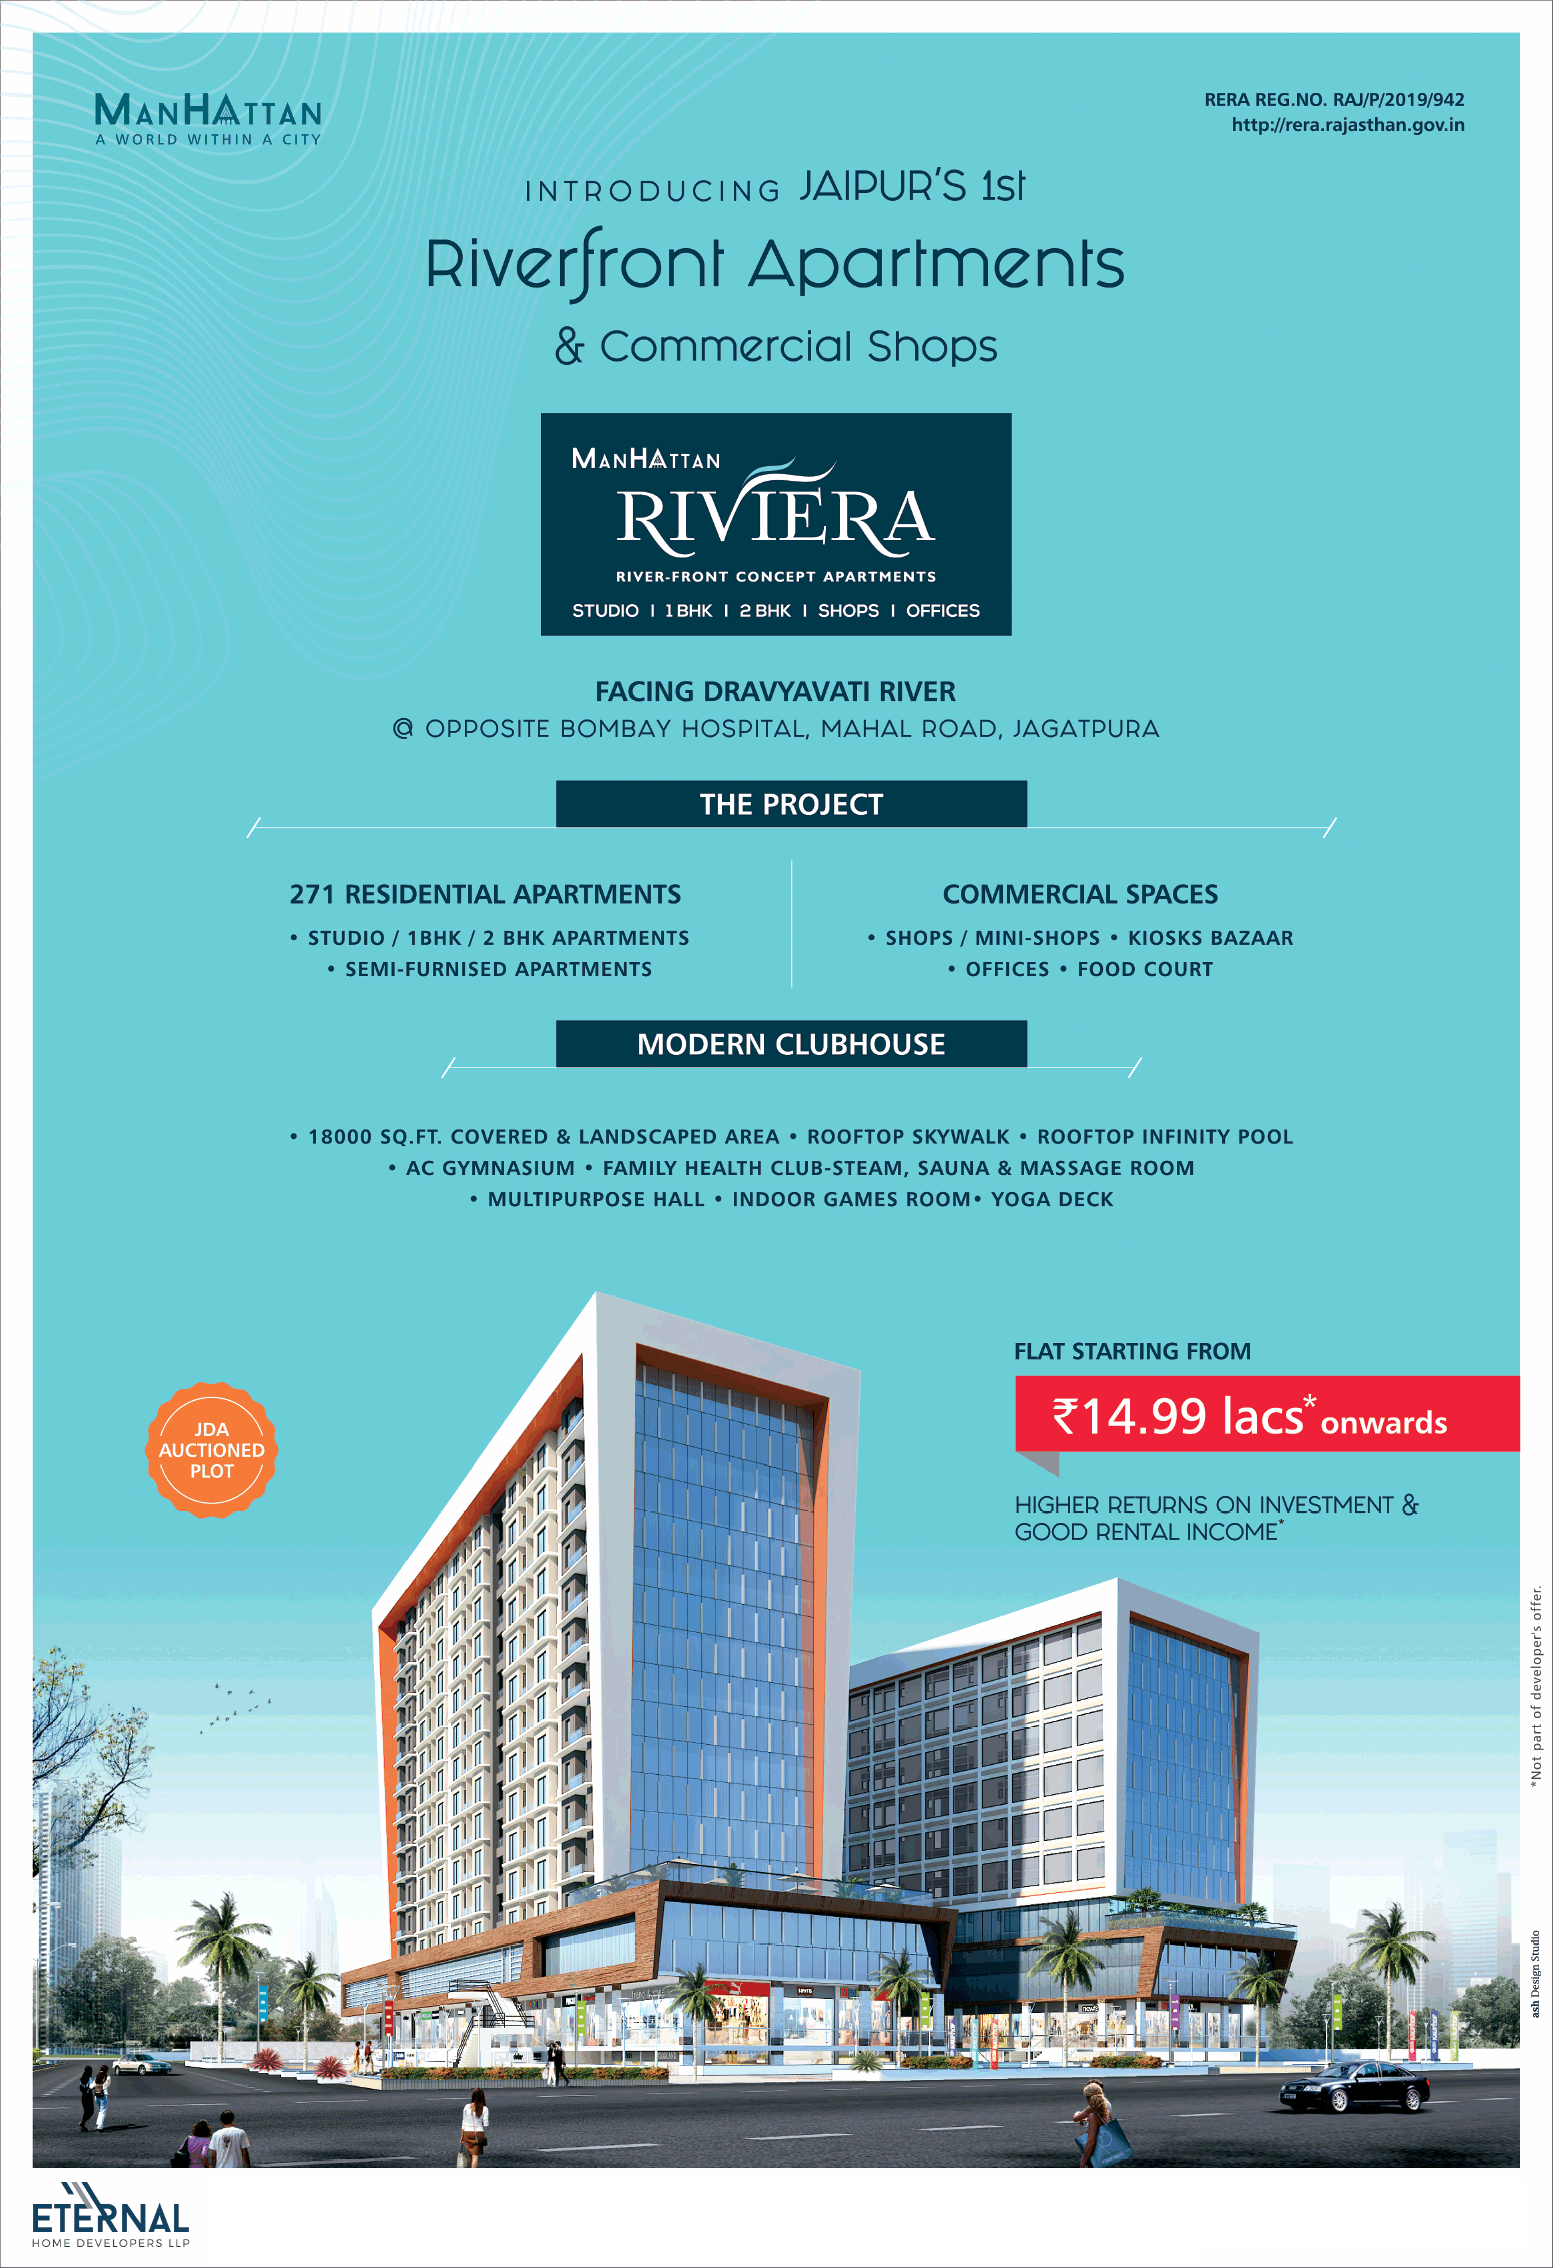 Introducing riverfront apartments & commercial shops at Manhattan Rivera in Jaipur